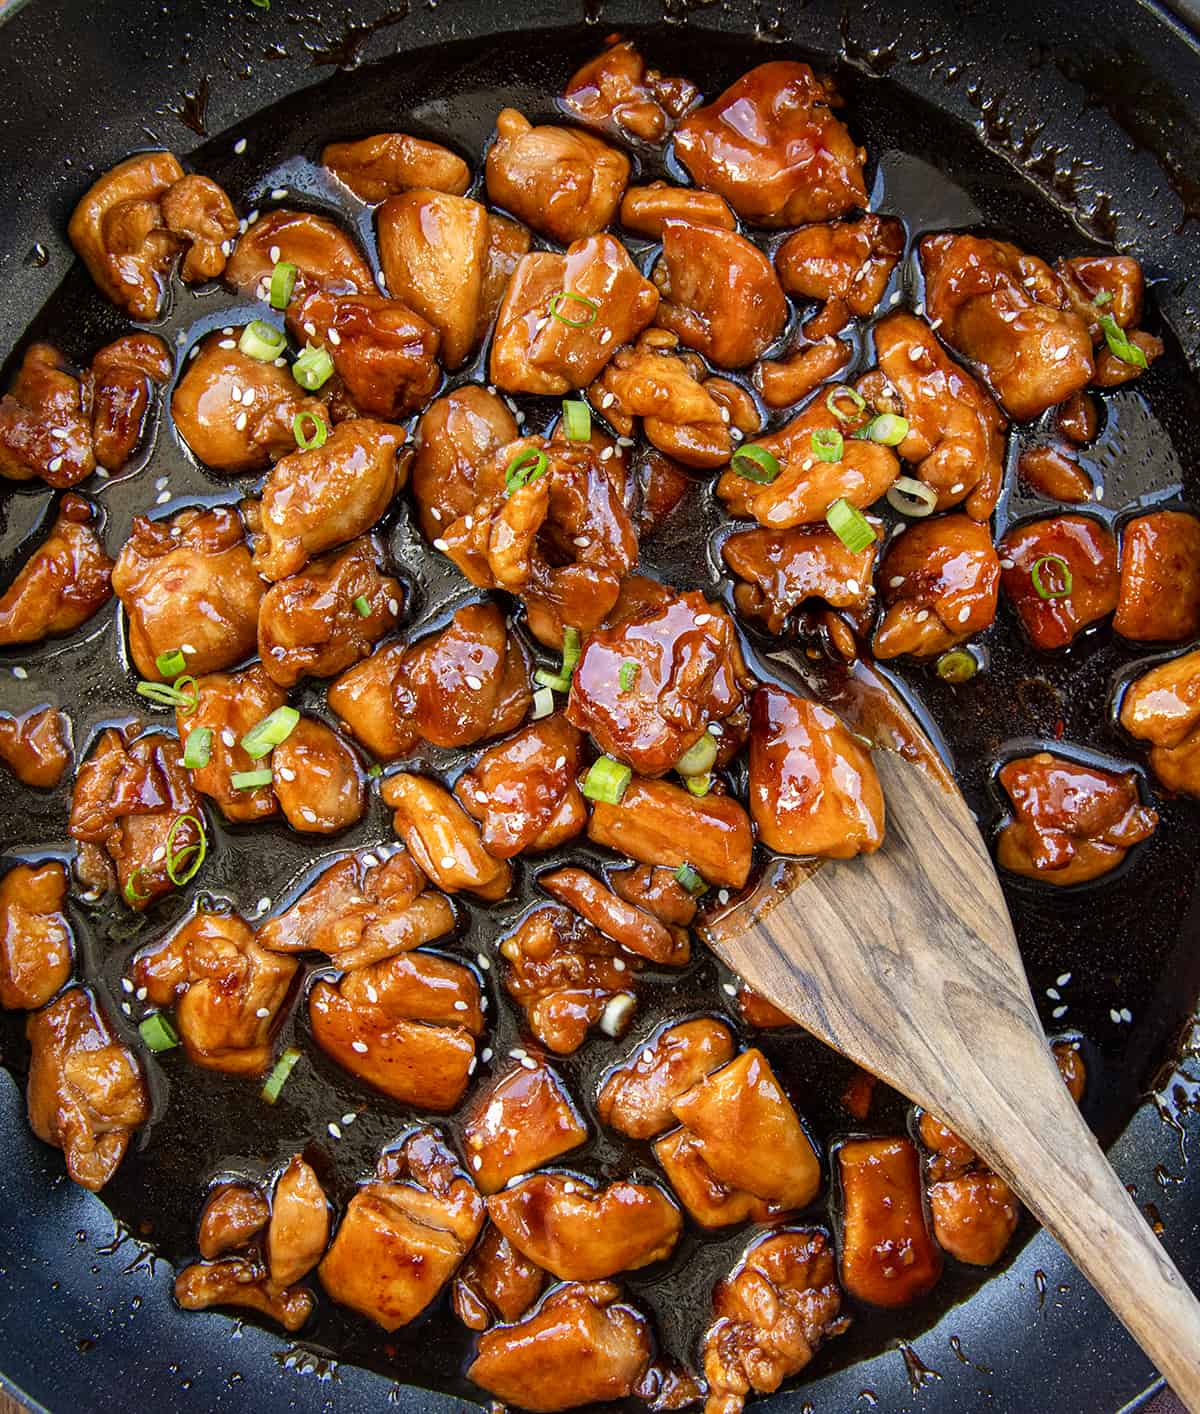 Bourbon Chicken in a black skillet on a wooden table from overhead.